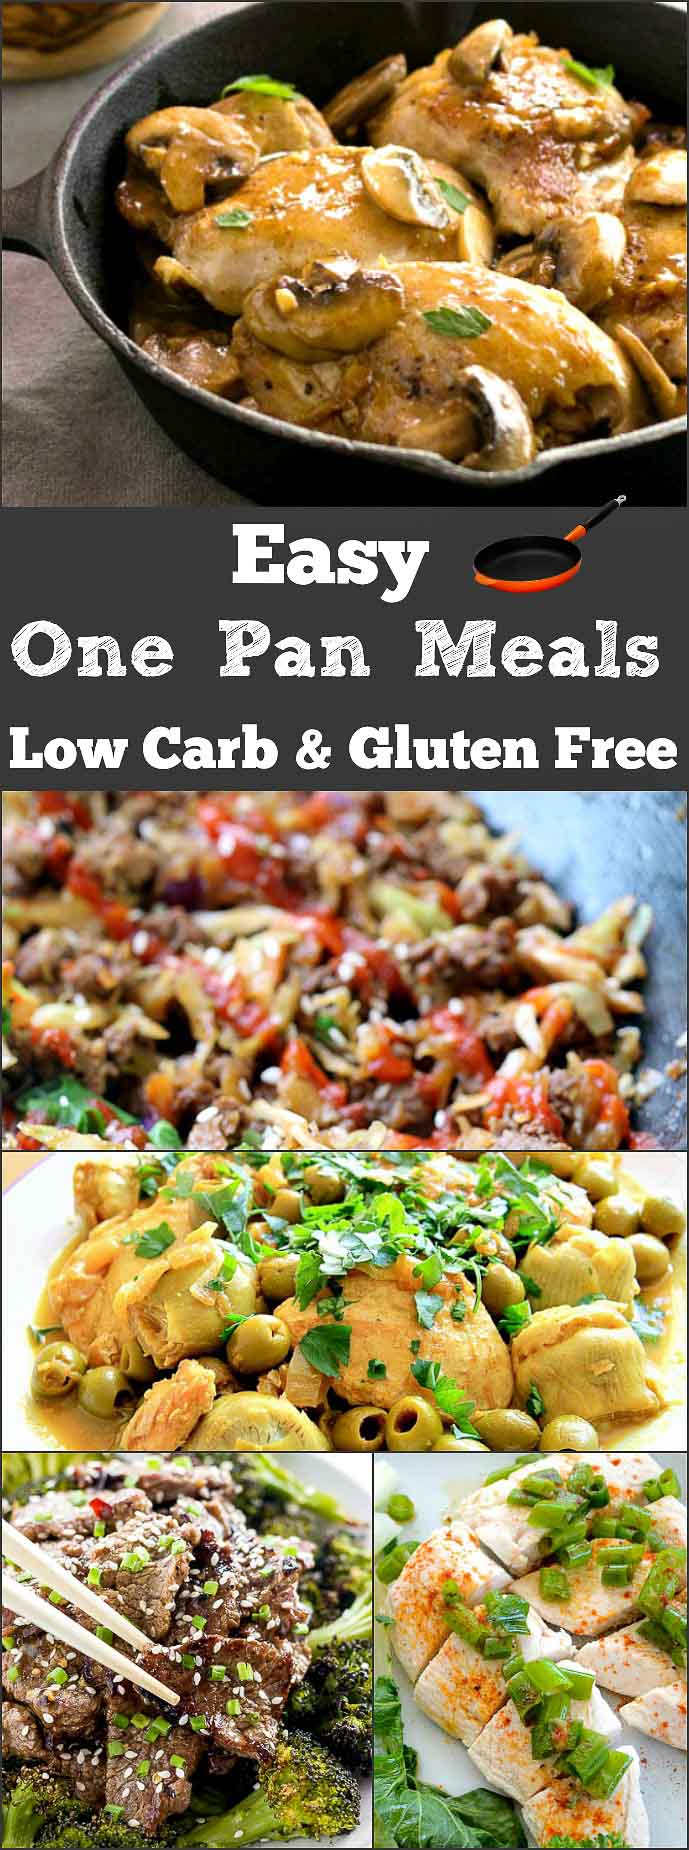 Easy One Pan Meals Low Carb- simple all in one pan meals